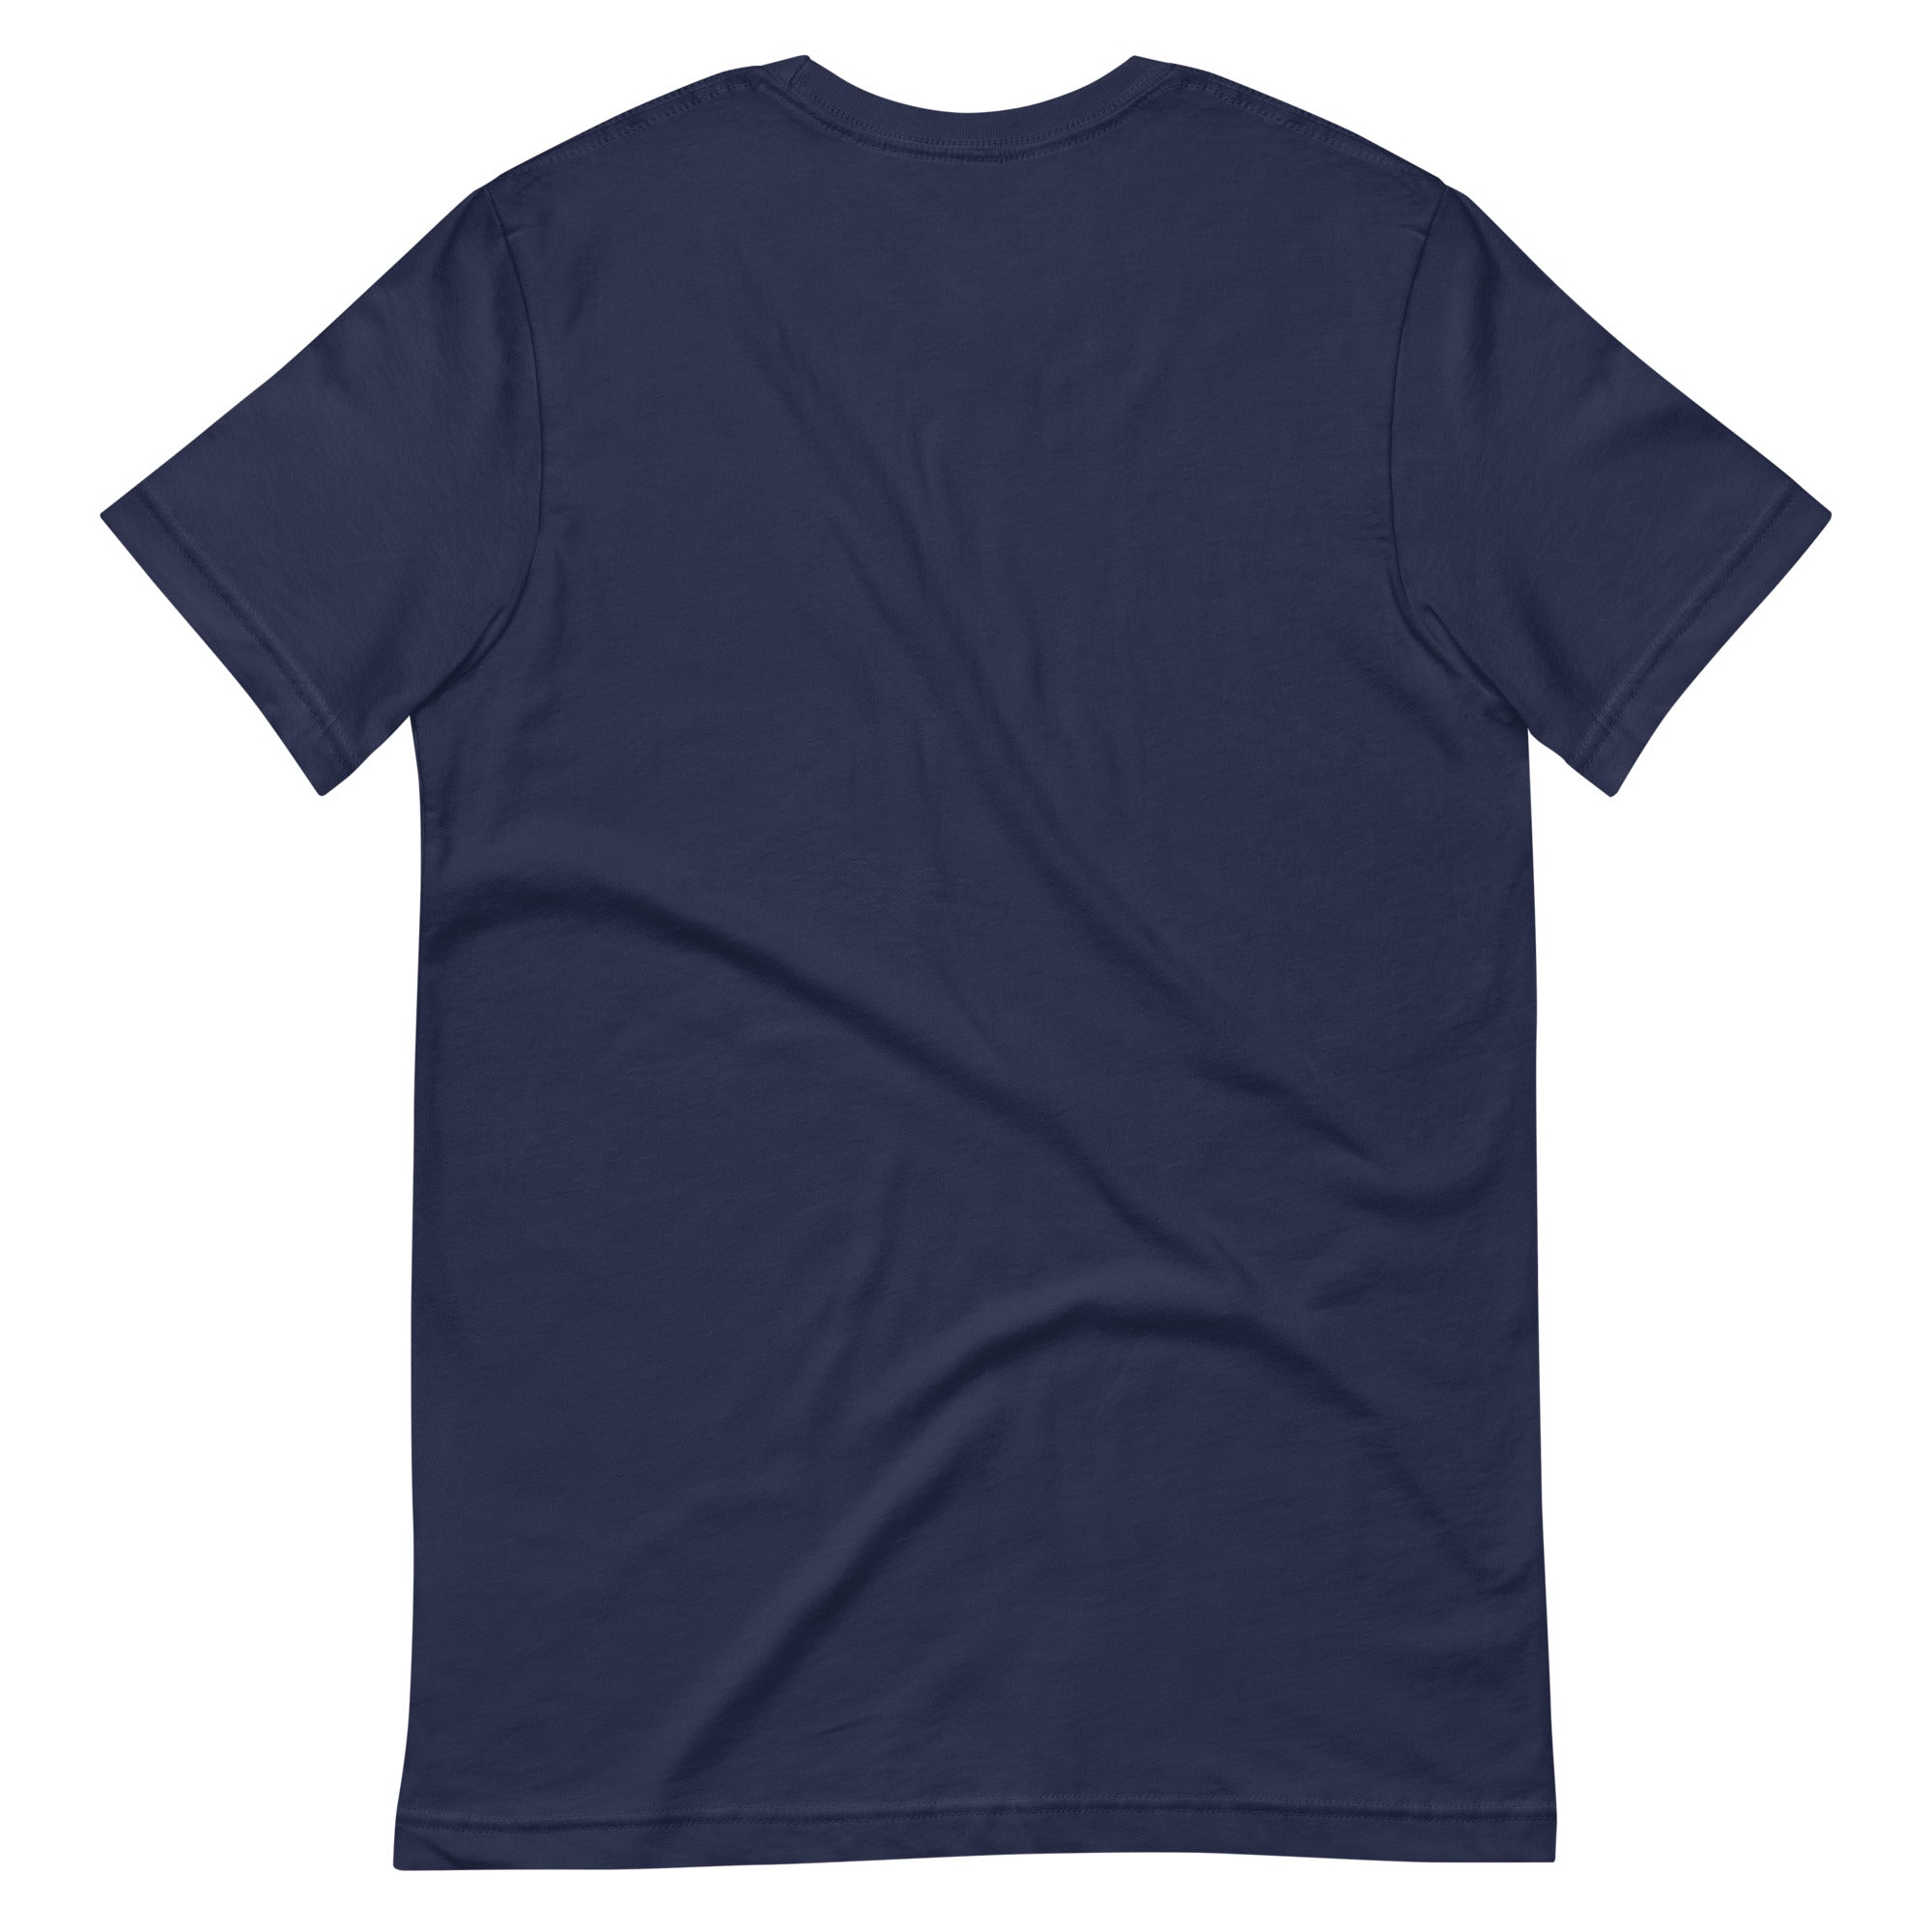 Arches T-Shirt (Navy) - Pacific Heights | San Francisco, CA